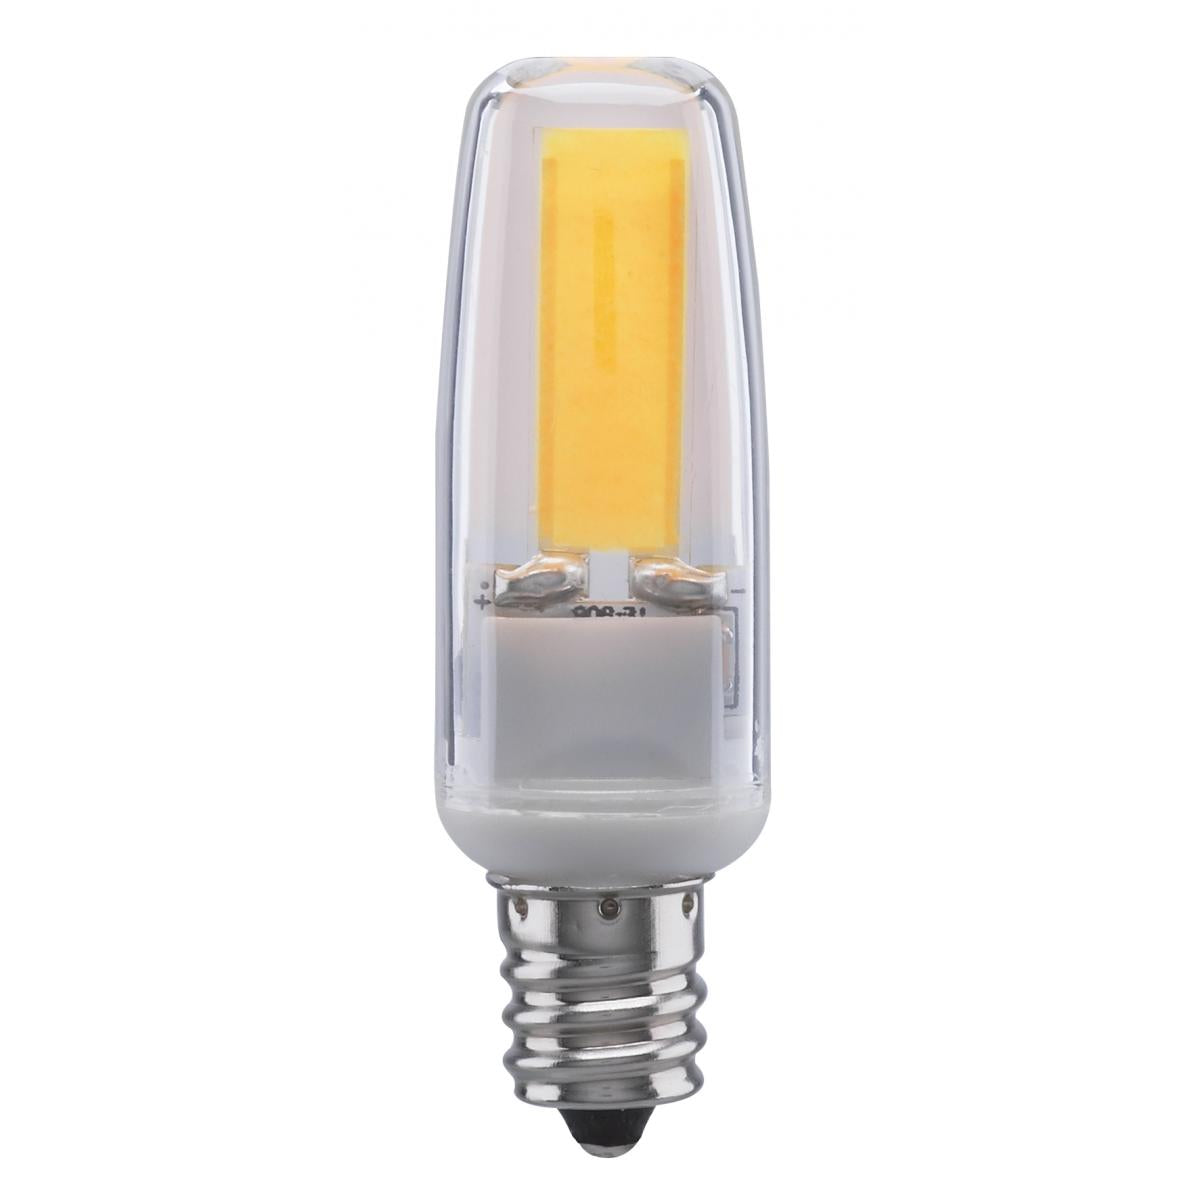 Satco S11219 8 Watt T10 LED Frosted Medium base 4000K High Lumen 120 Volt Non-Dimmable Carded